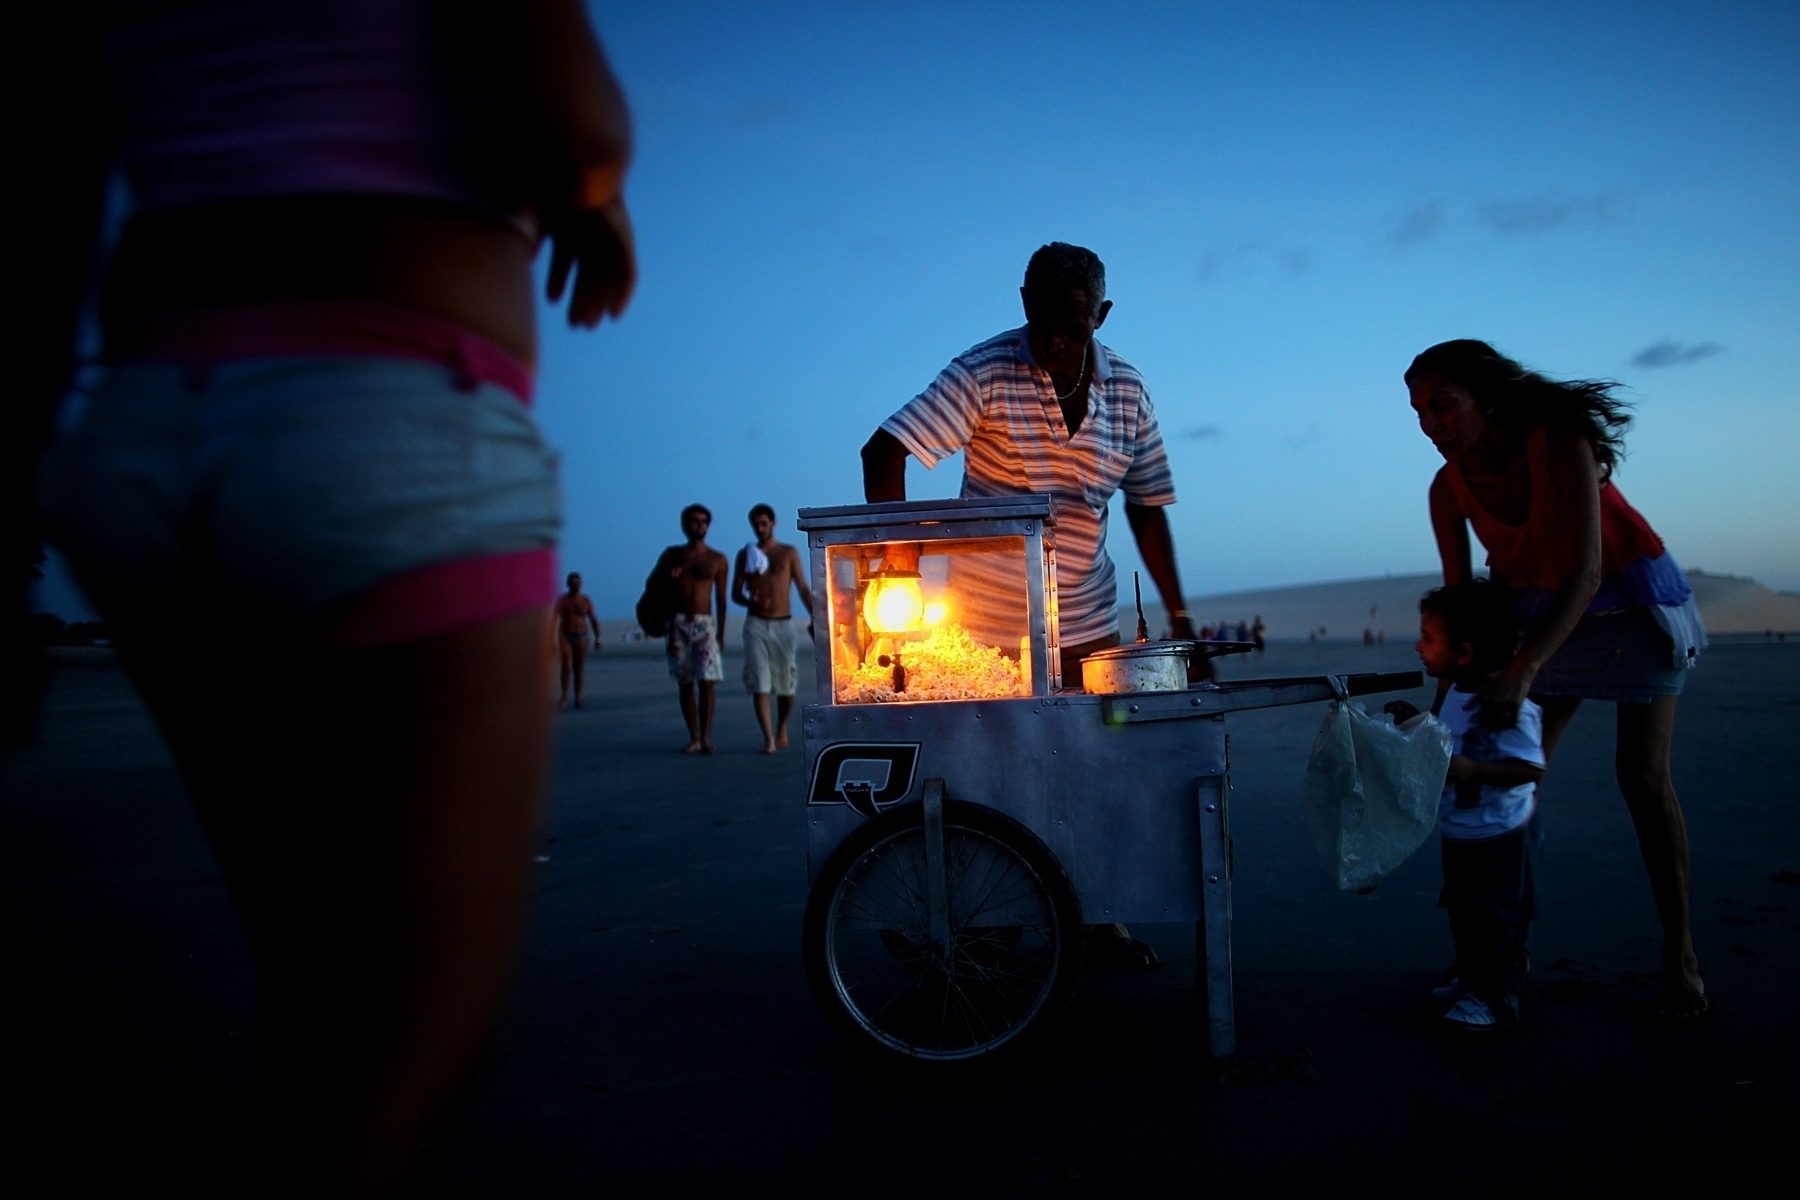 A man sells popcorn at the beach during sunset. As people walk by a mom waits with her boy for the popcorn the man is preparing.